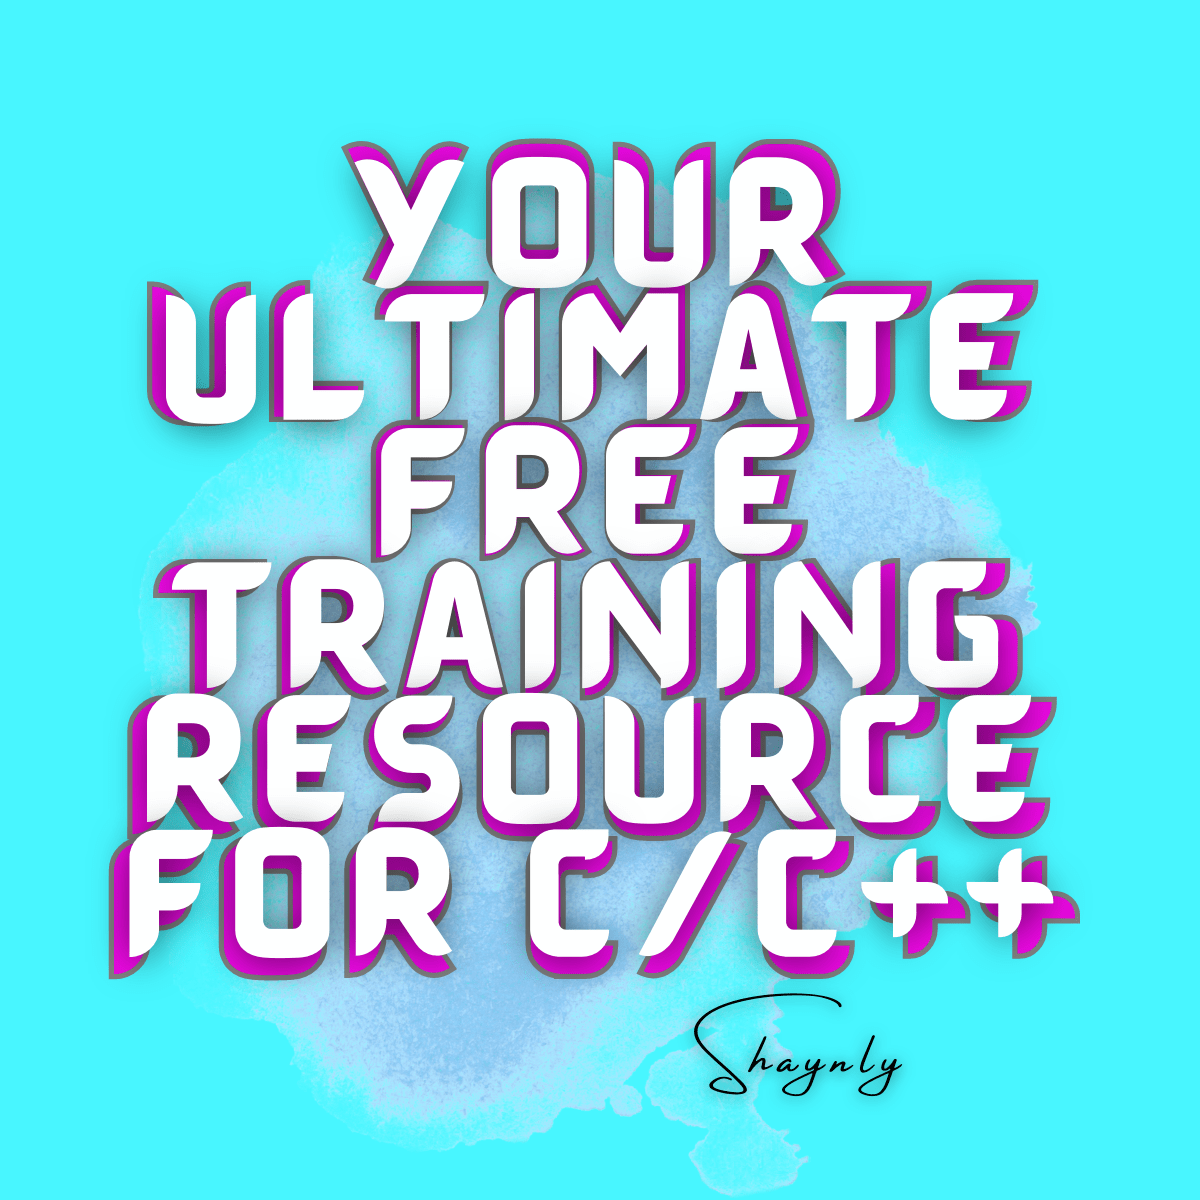 Your Ultimate Free Training Resource for C/C++